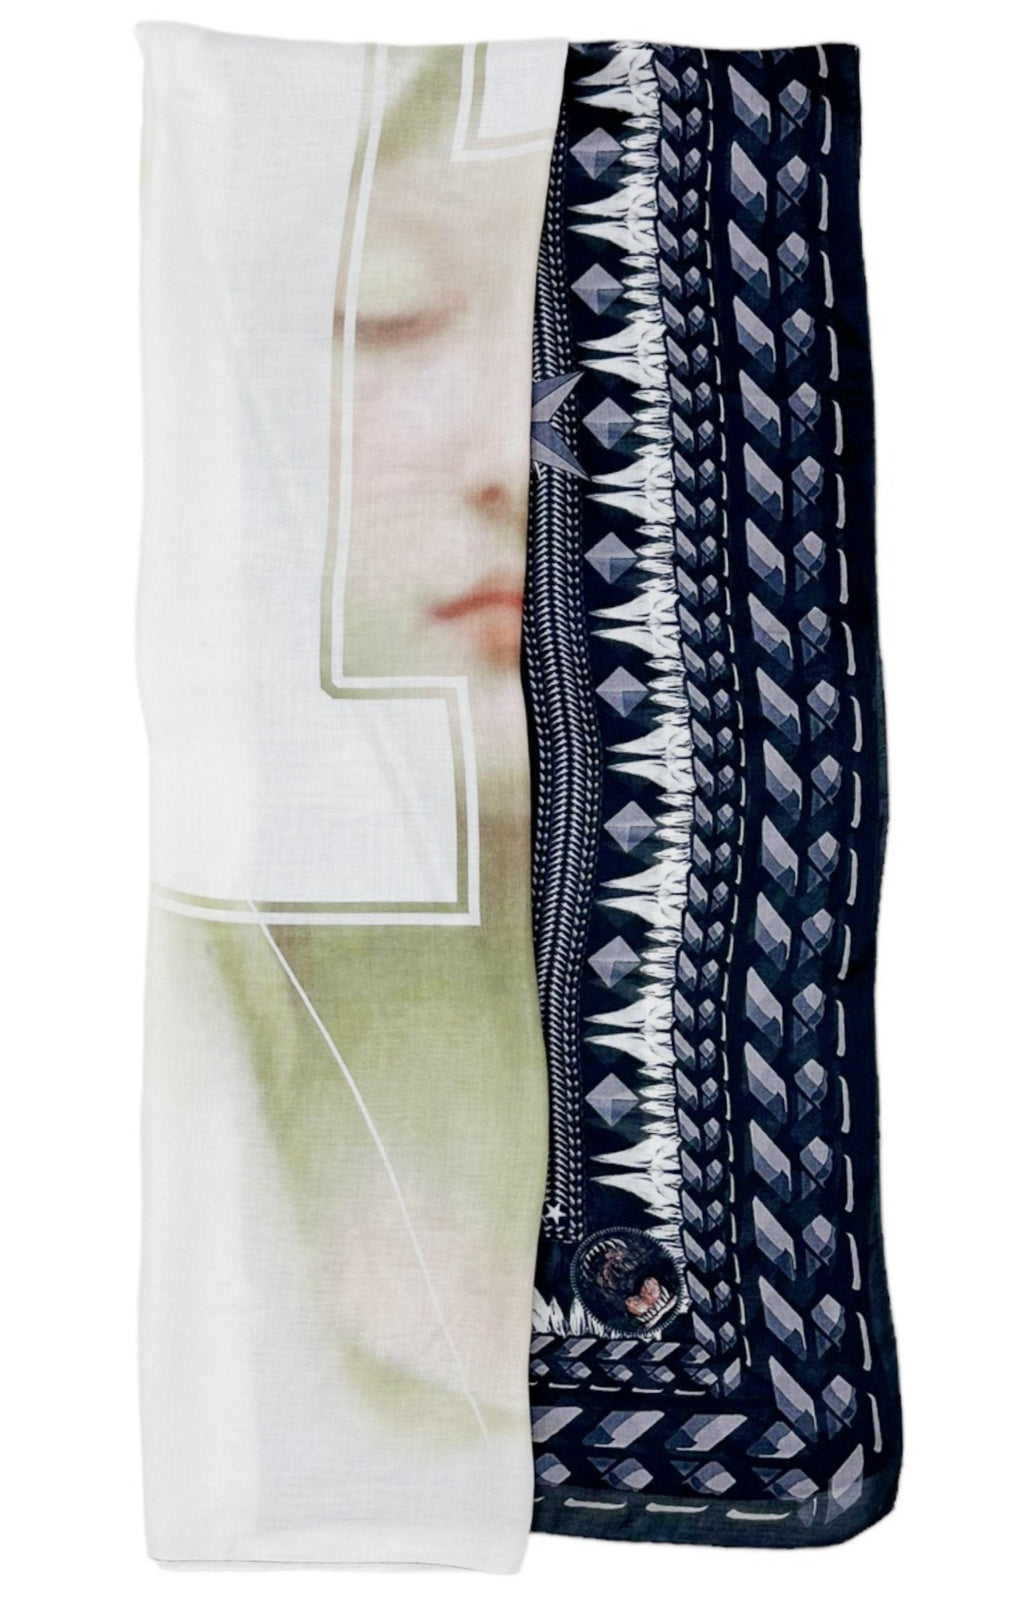 GIVENCHY (NEW) with tags Scarf Size: 46" x 44"